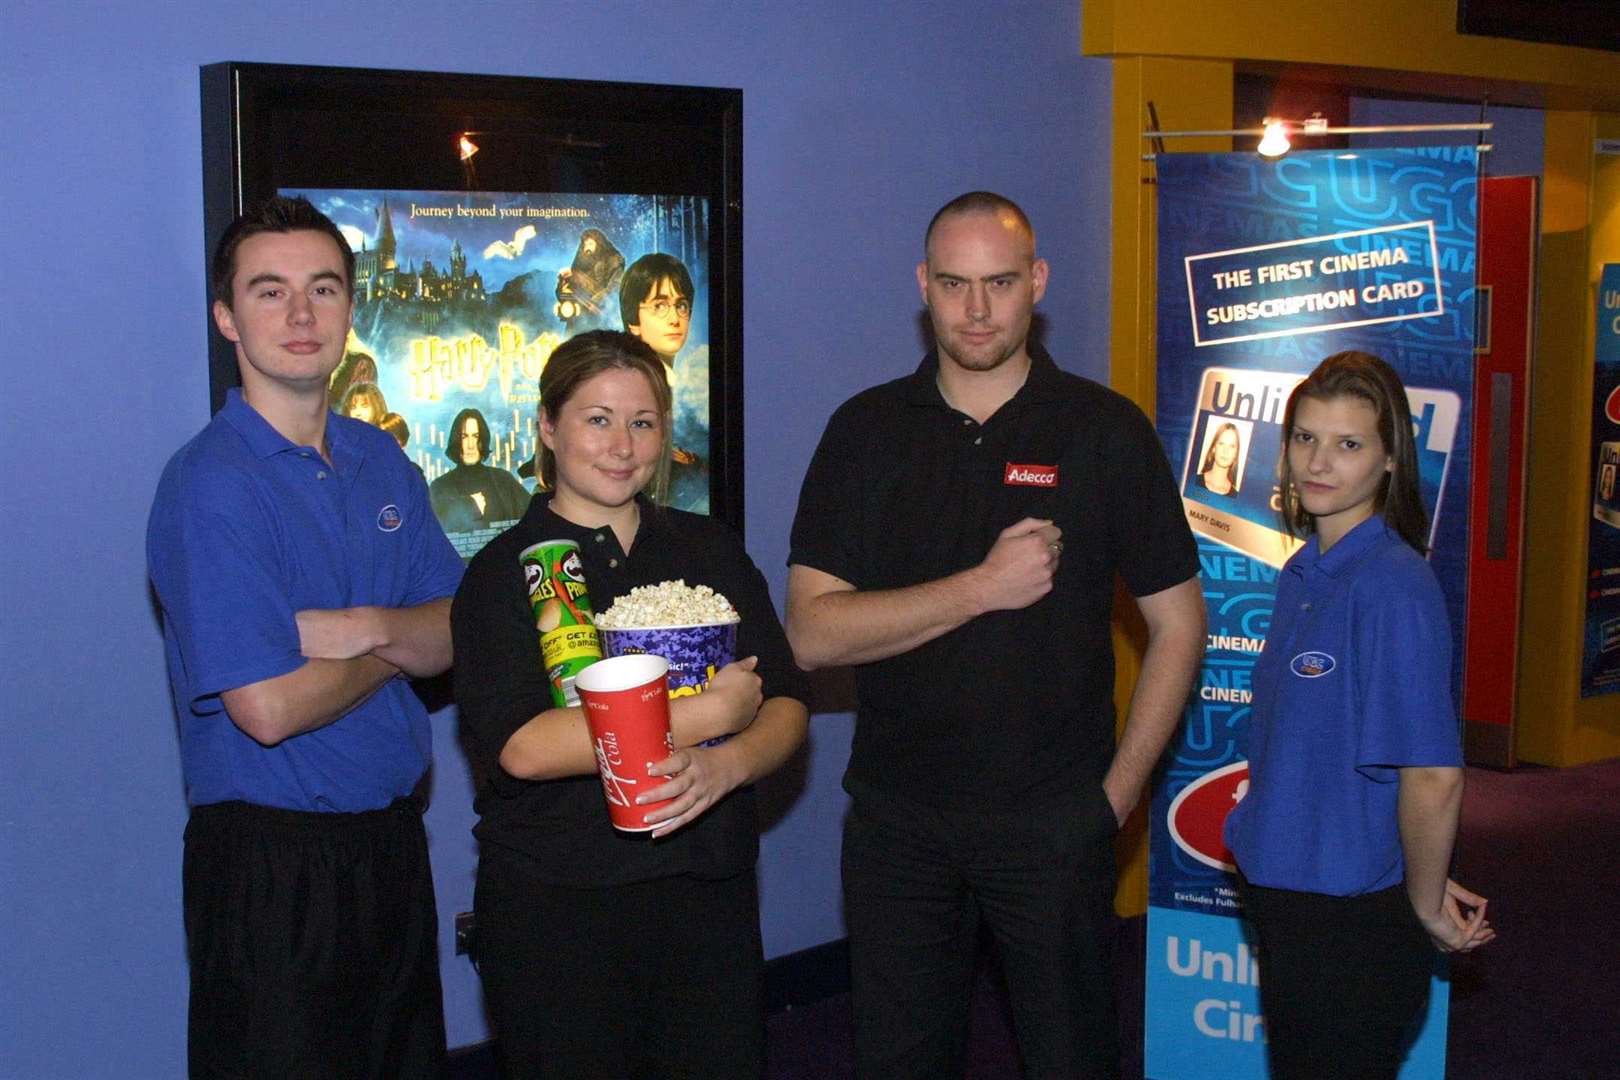 UGC Cinema at Strood, now Cineworld, employed temporary staff to cope with the floods of Harry Potter goers!